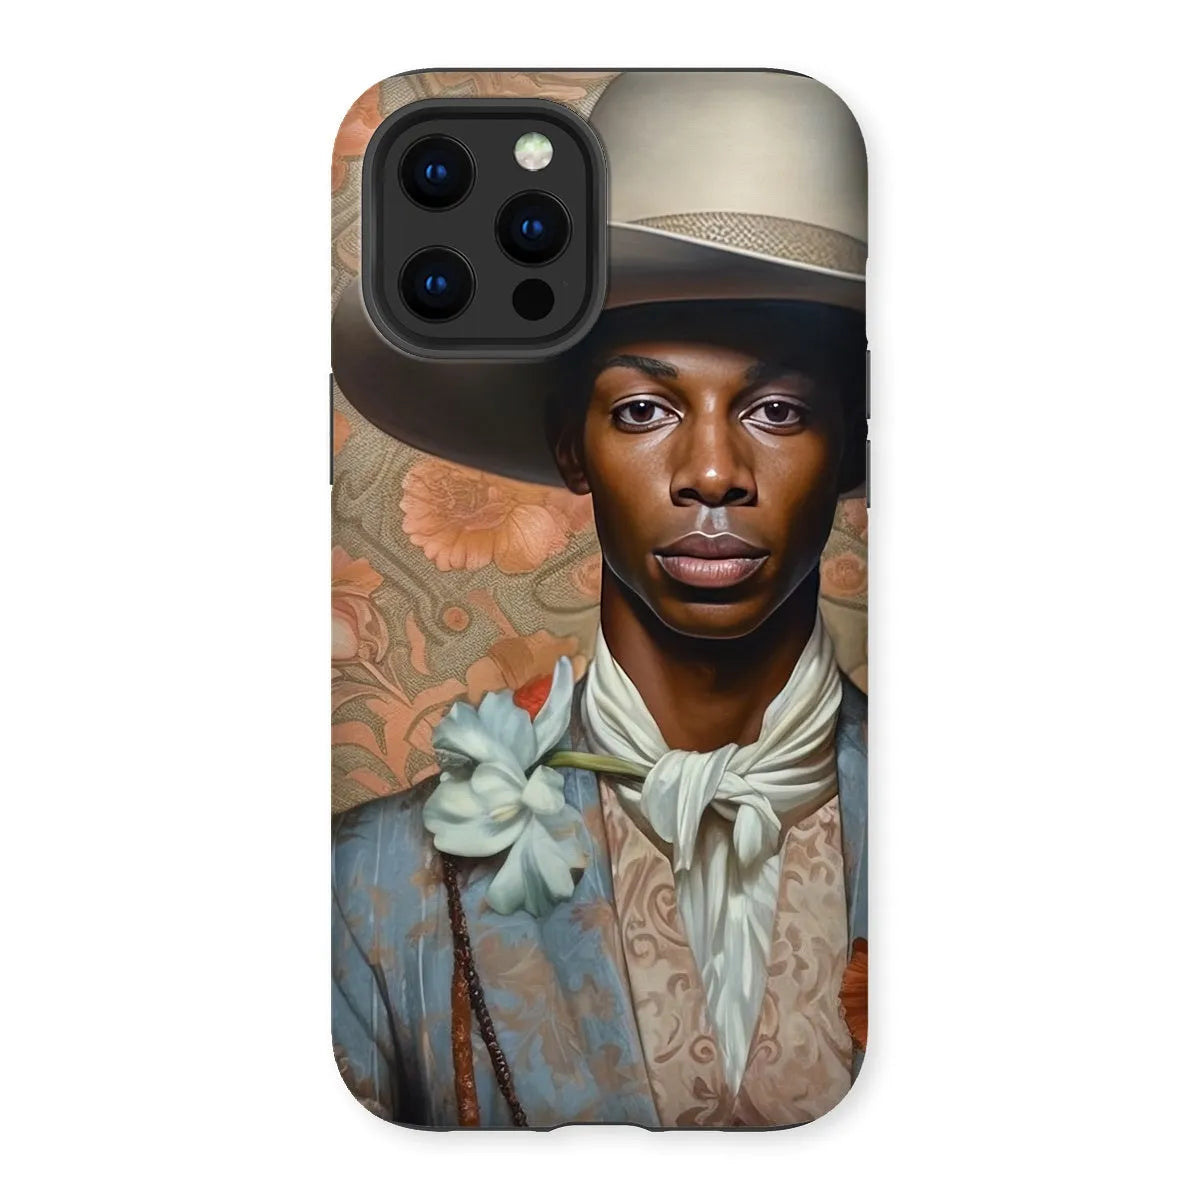 Apollo The Gay Cowboy - Gay Aesthetic Art Phone Case - Iphone 12 Pro Max / Matte - Mobile Phone Cases - Aesthetic Art